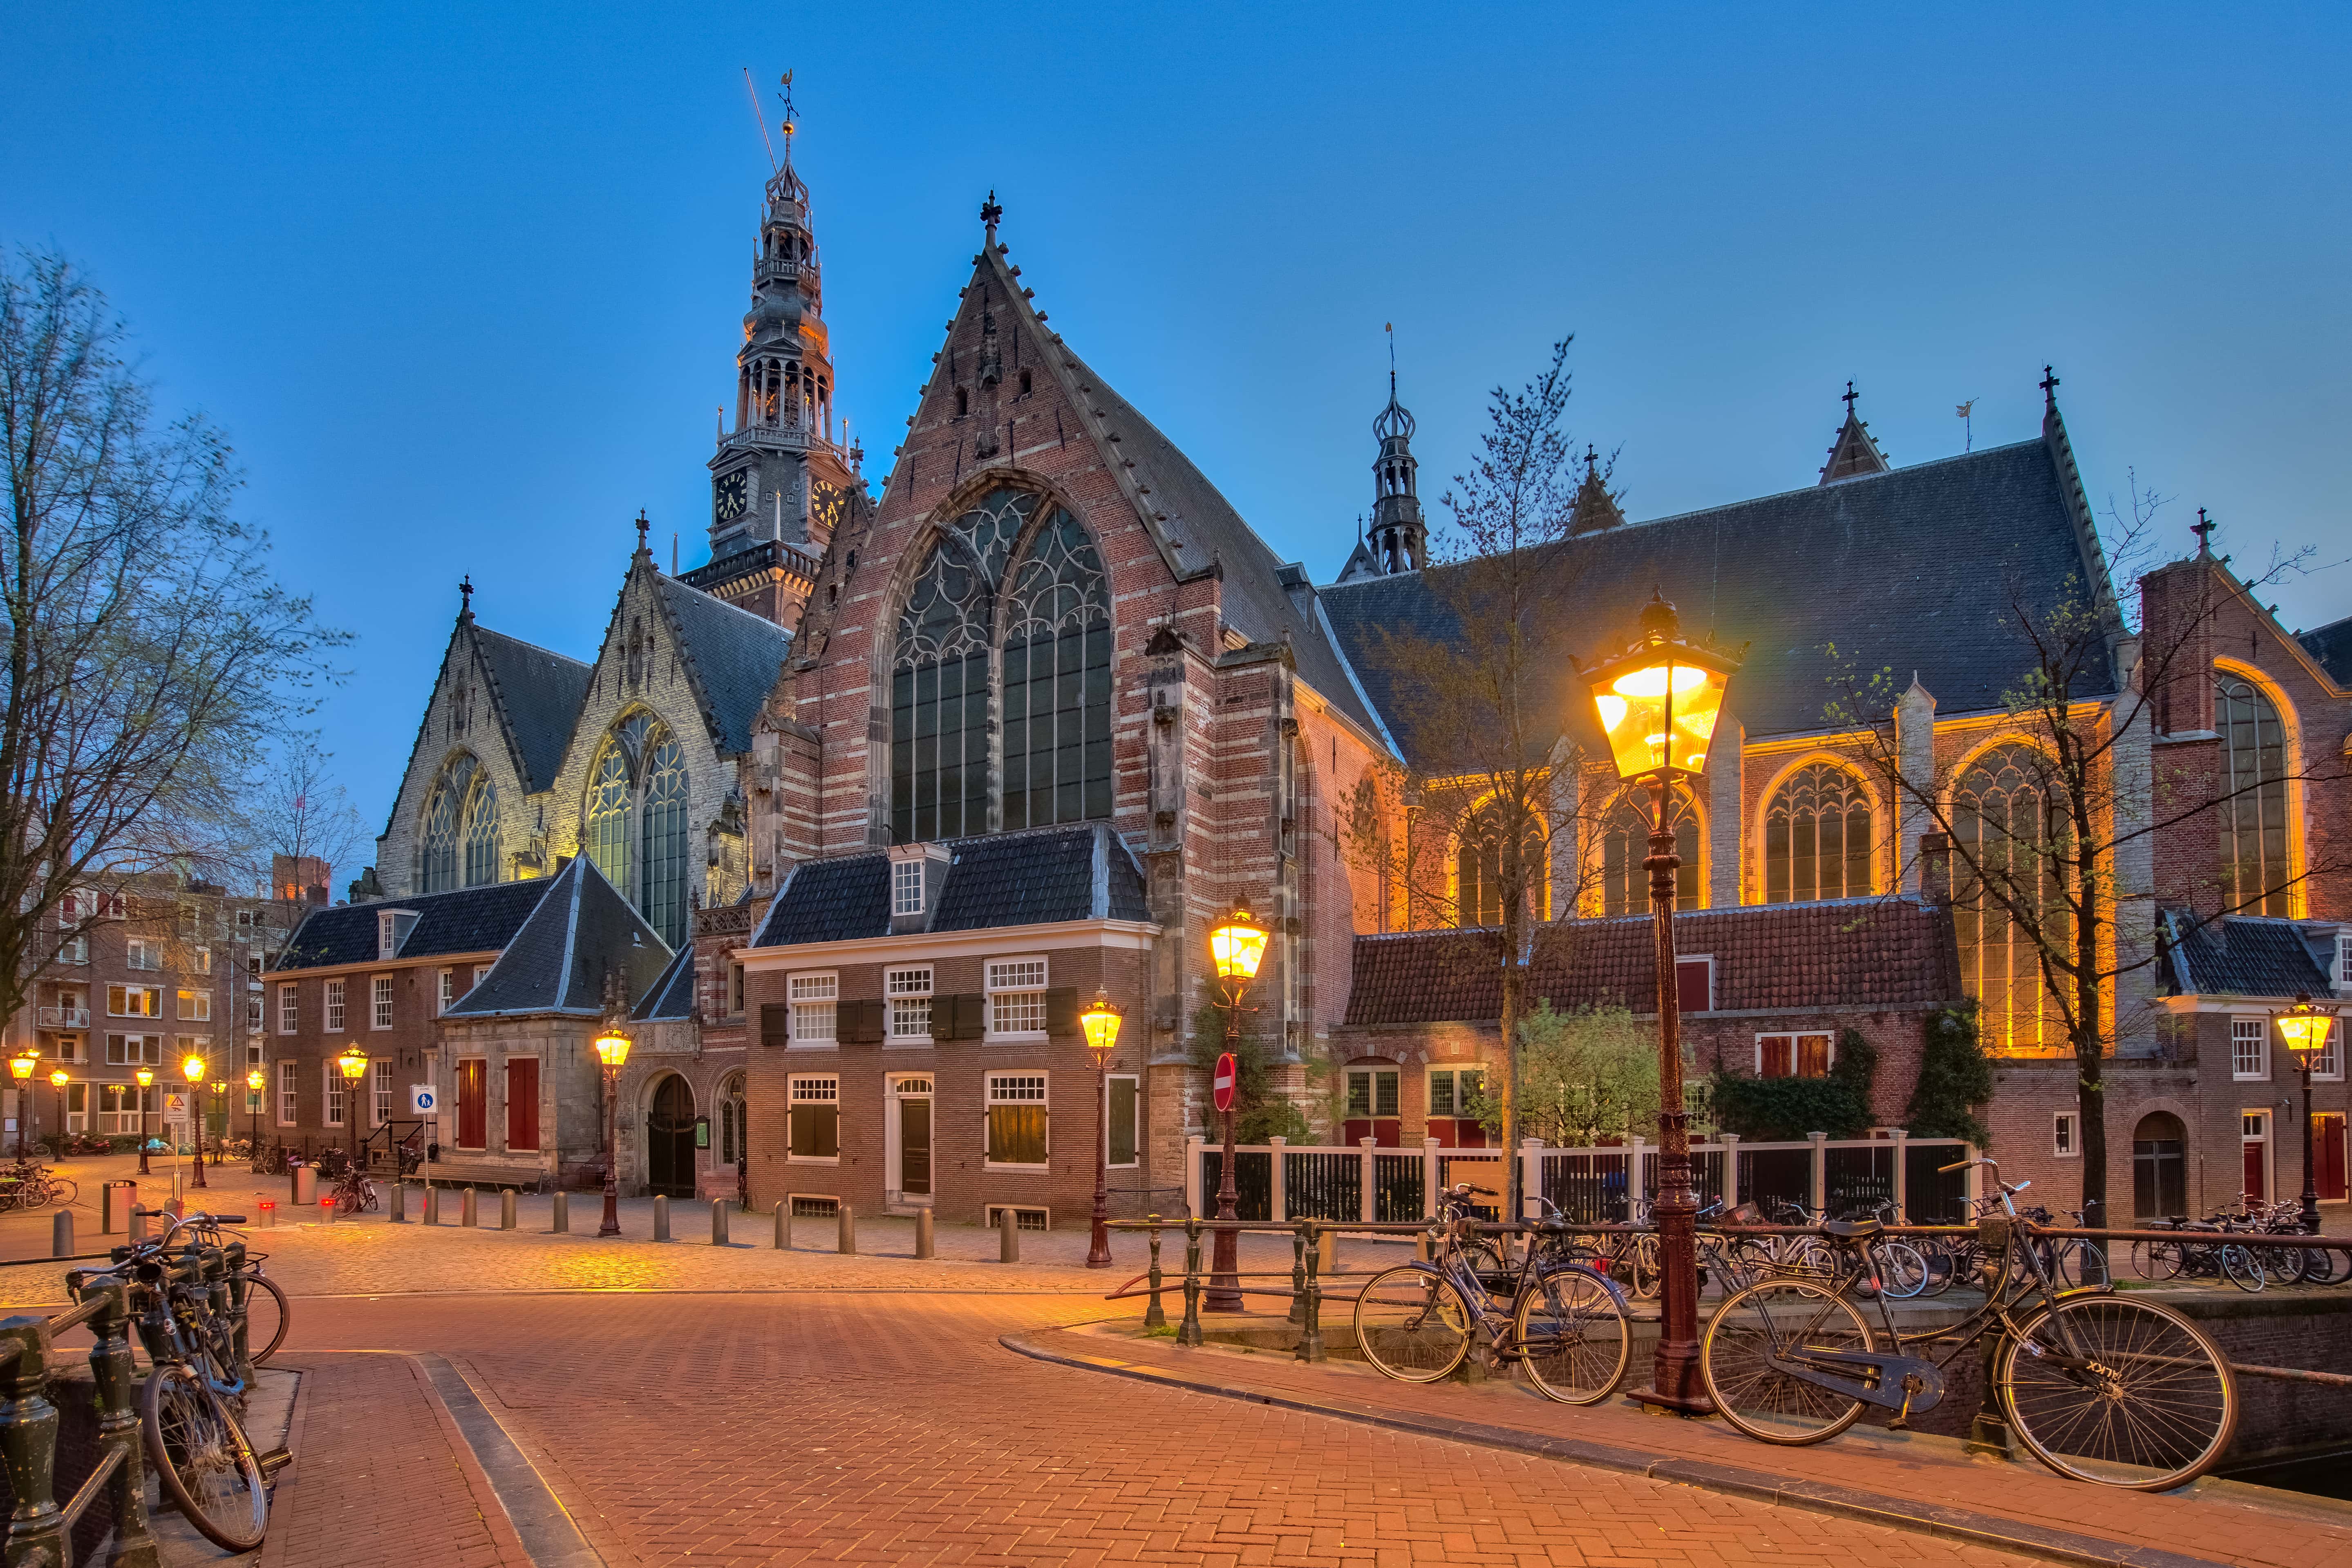 The old church Oude Kerk in Amsterdam city at night, Netherlands.